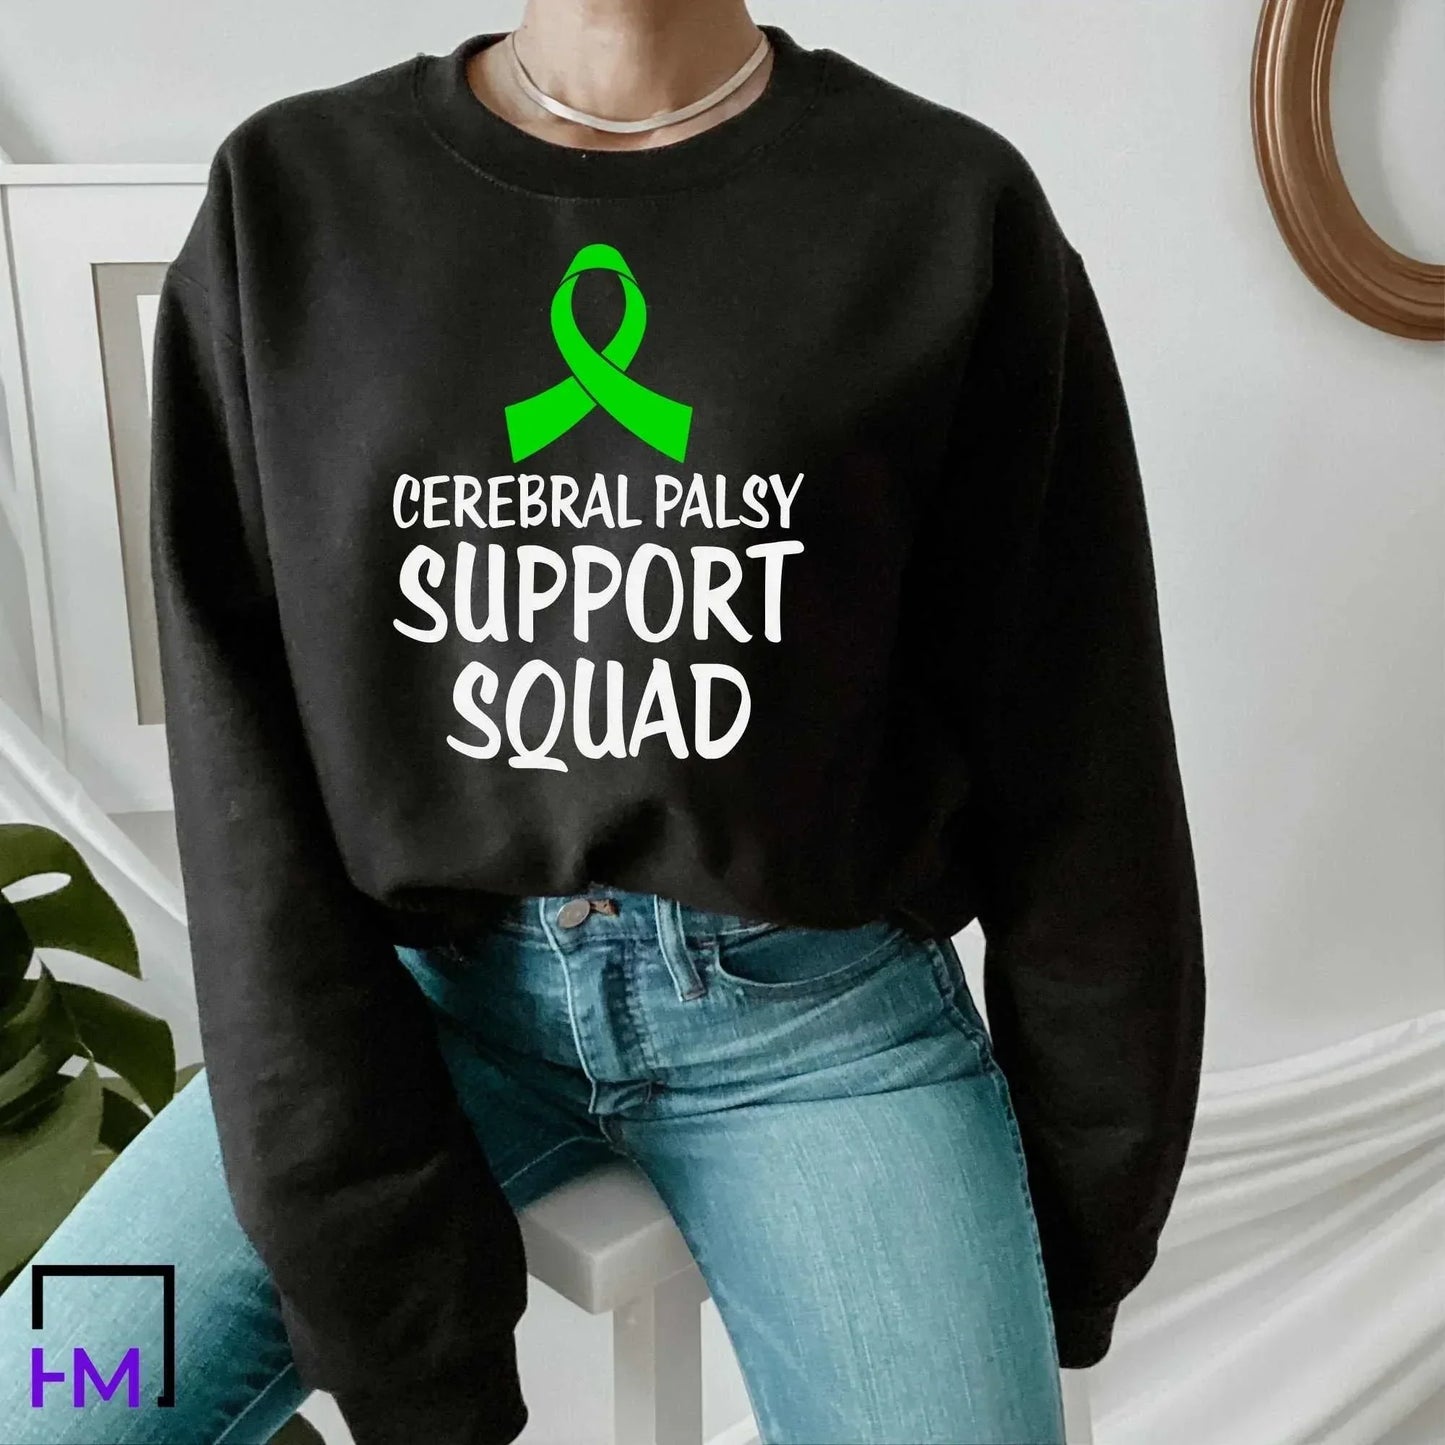 Cerebral Palsy Support Squad Shirt, Motivational Shirt, Cerebral Palsy Shirt, Cerebral Palsy Gifts,Cerebral Palsy Awareness Shirt,CP Support